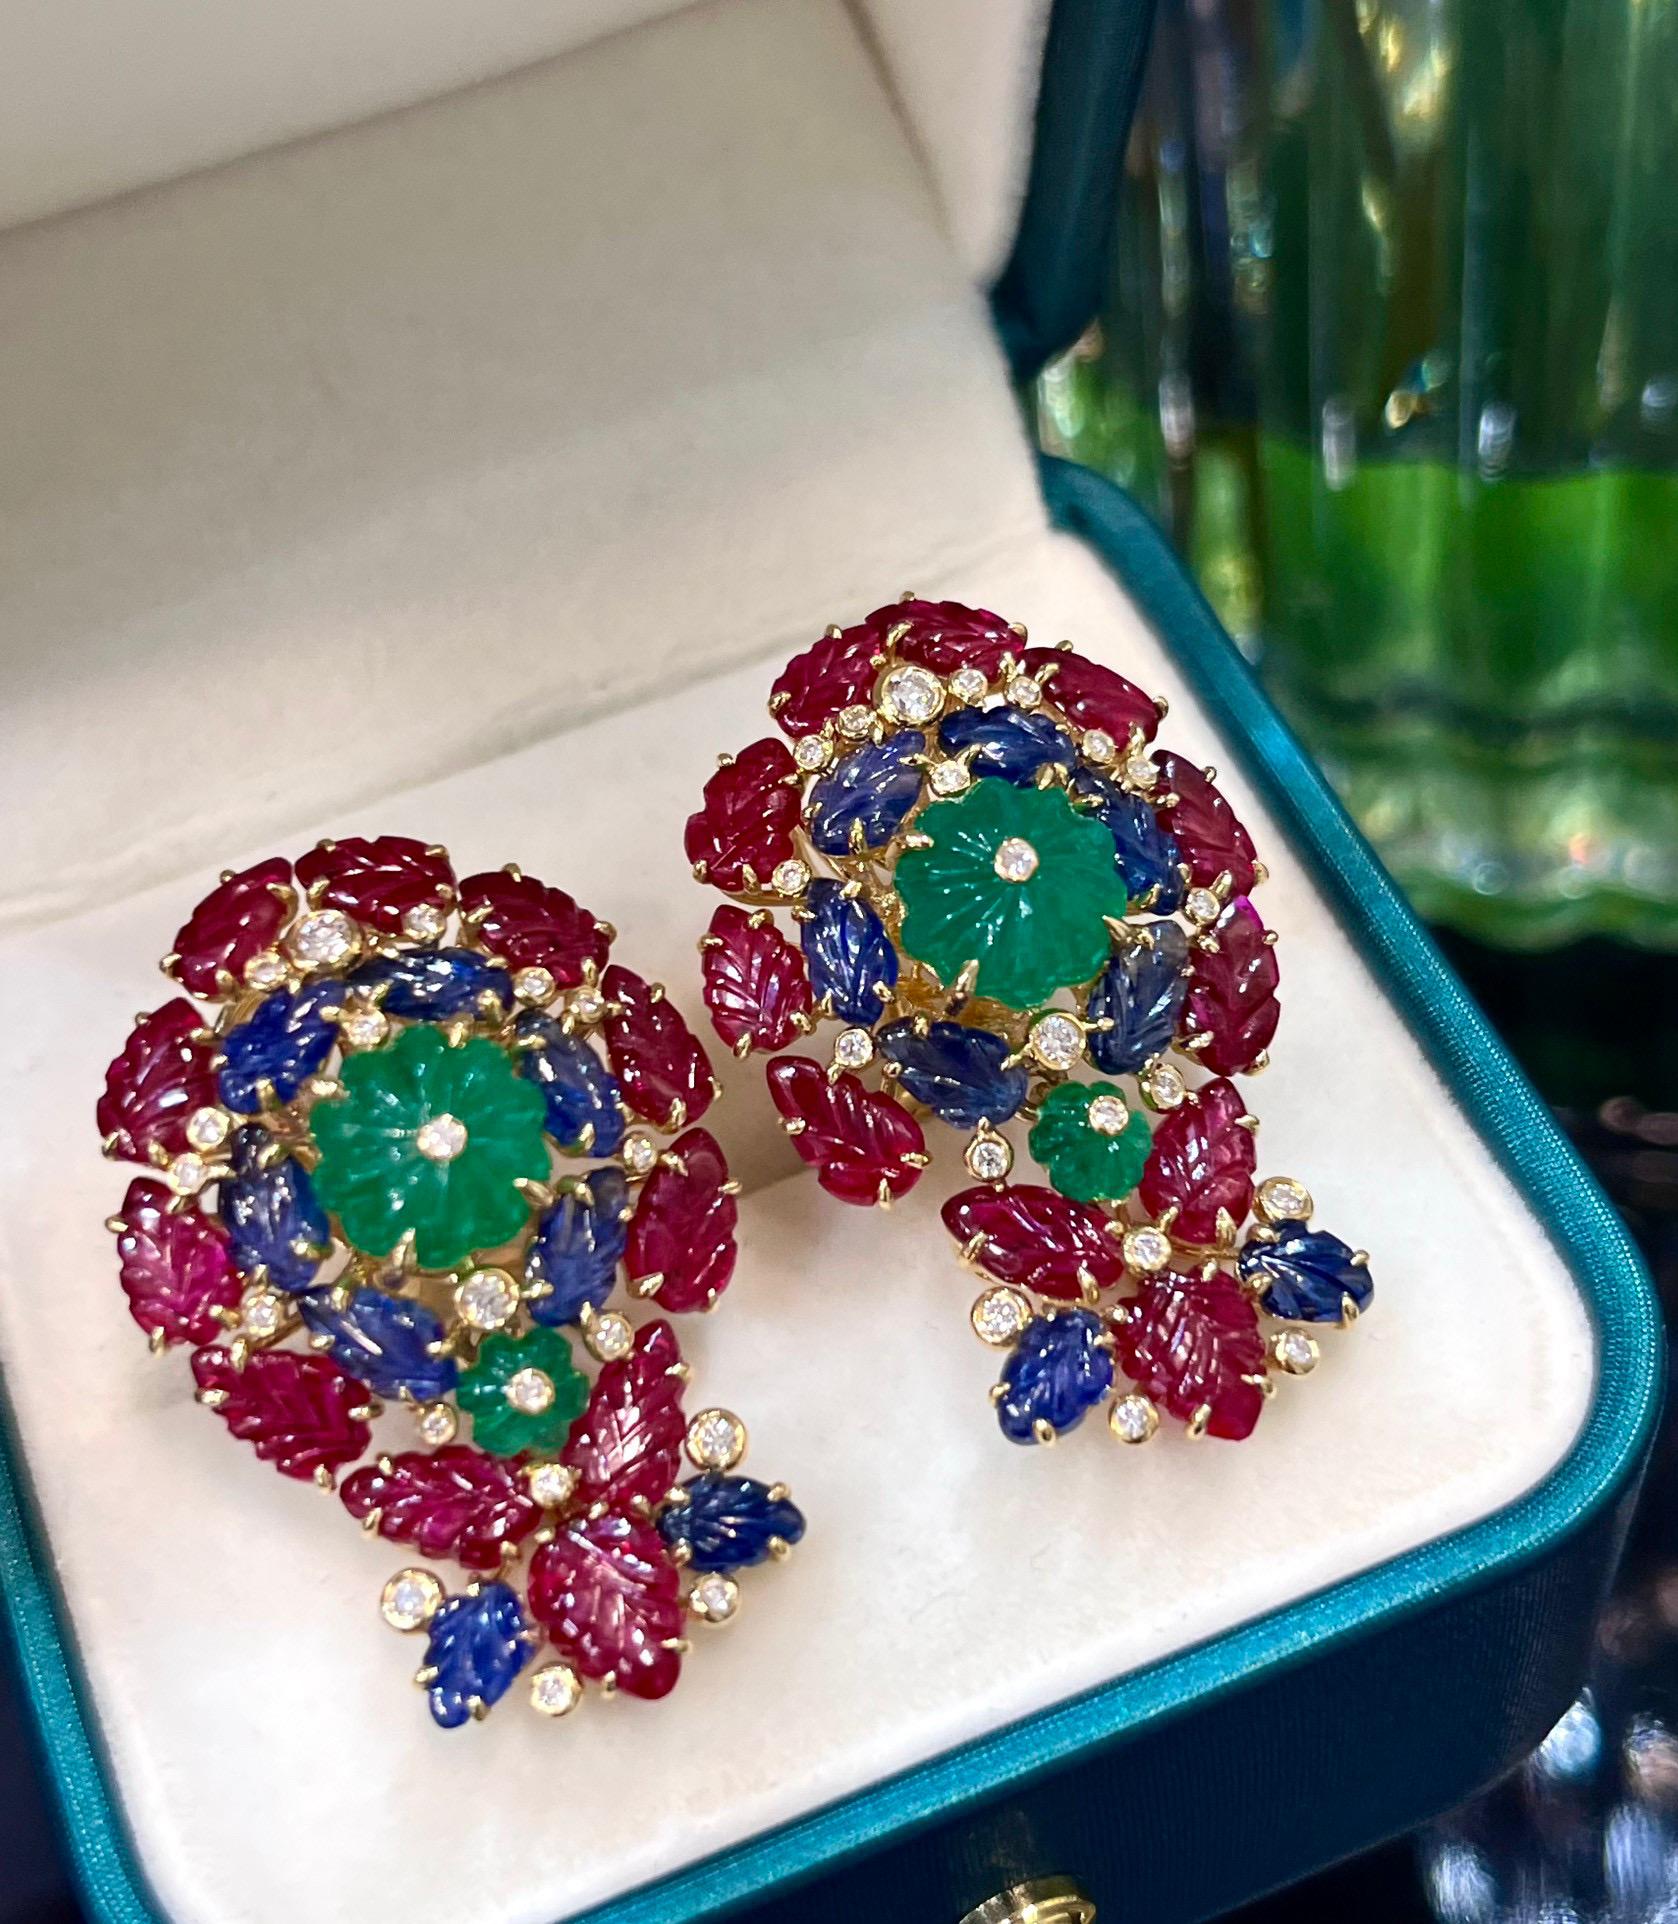 18K Gold Emerald & Ruby & Sapphire Earrings with Diamonds

Main Stone Emerald - Total 8.438 CT
Rubies & Sapphires & Emeralds - Total 15.345 CT
Diamonds - 0.342 CT
18K Gold
Total Weight - 19.7 GM

Introducing our stunning 18K Gold Emerald, Ruby, and